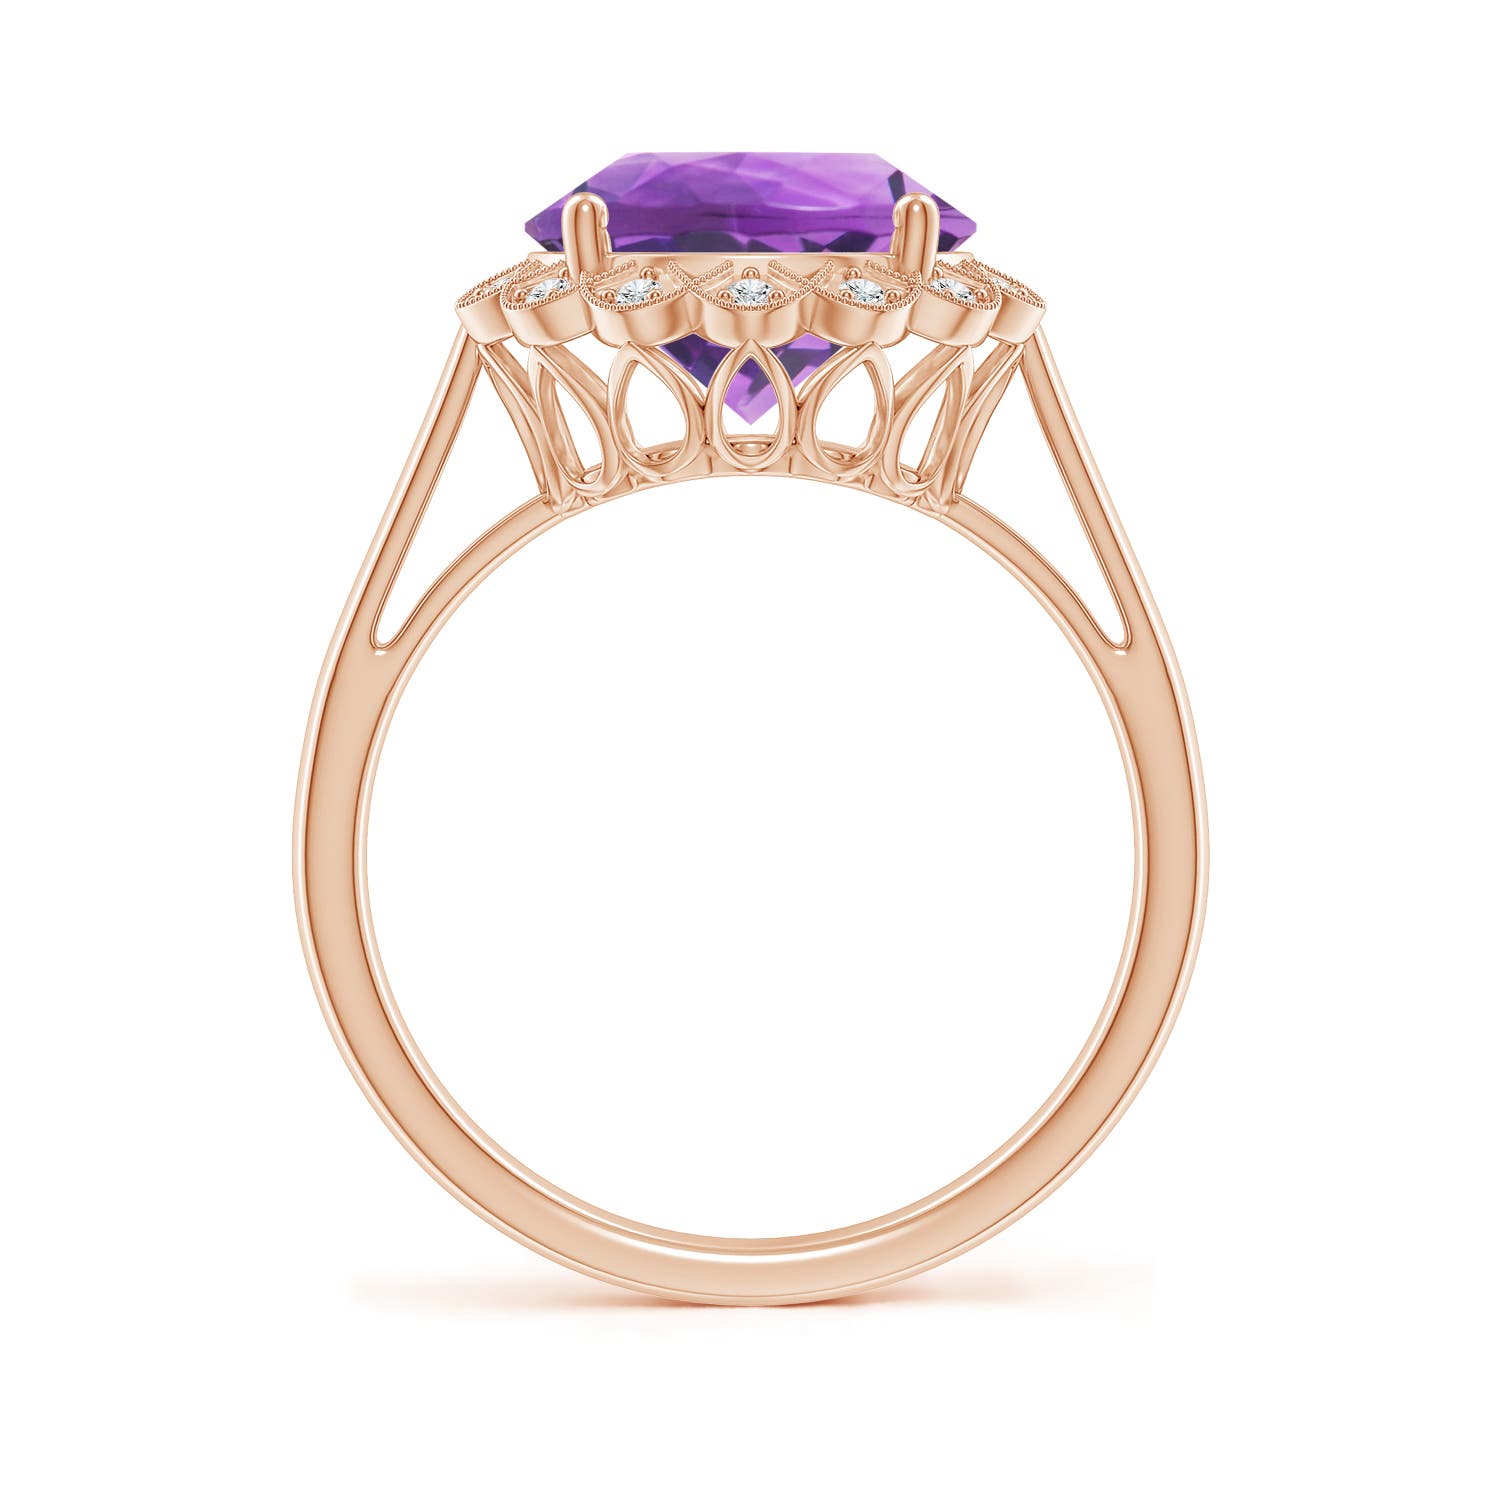 AA- Amethyst / 3.28 CT / 14 KT Rose Gold